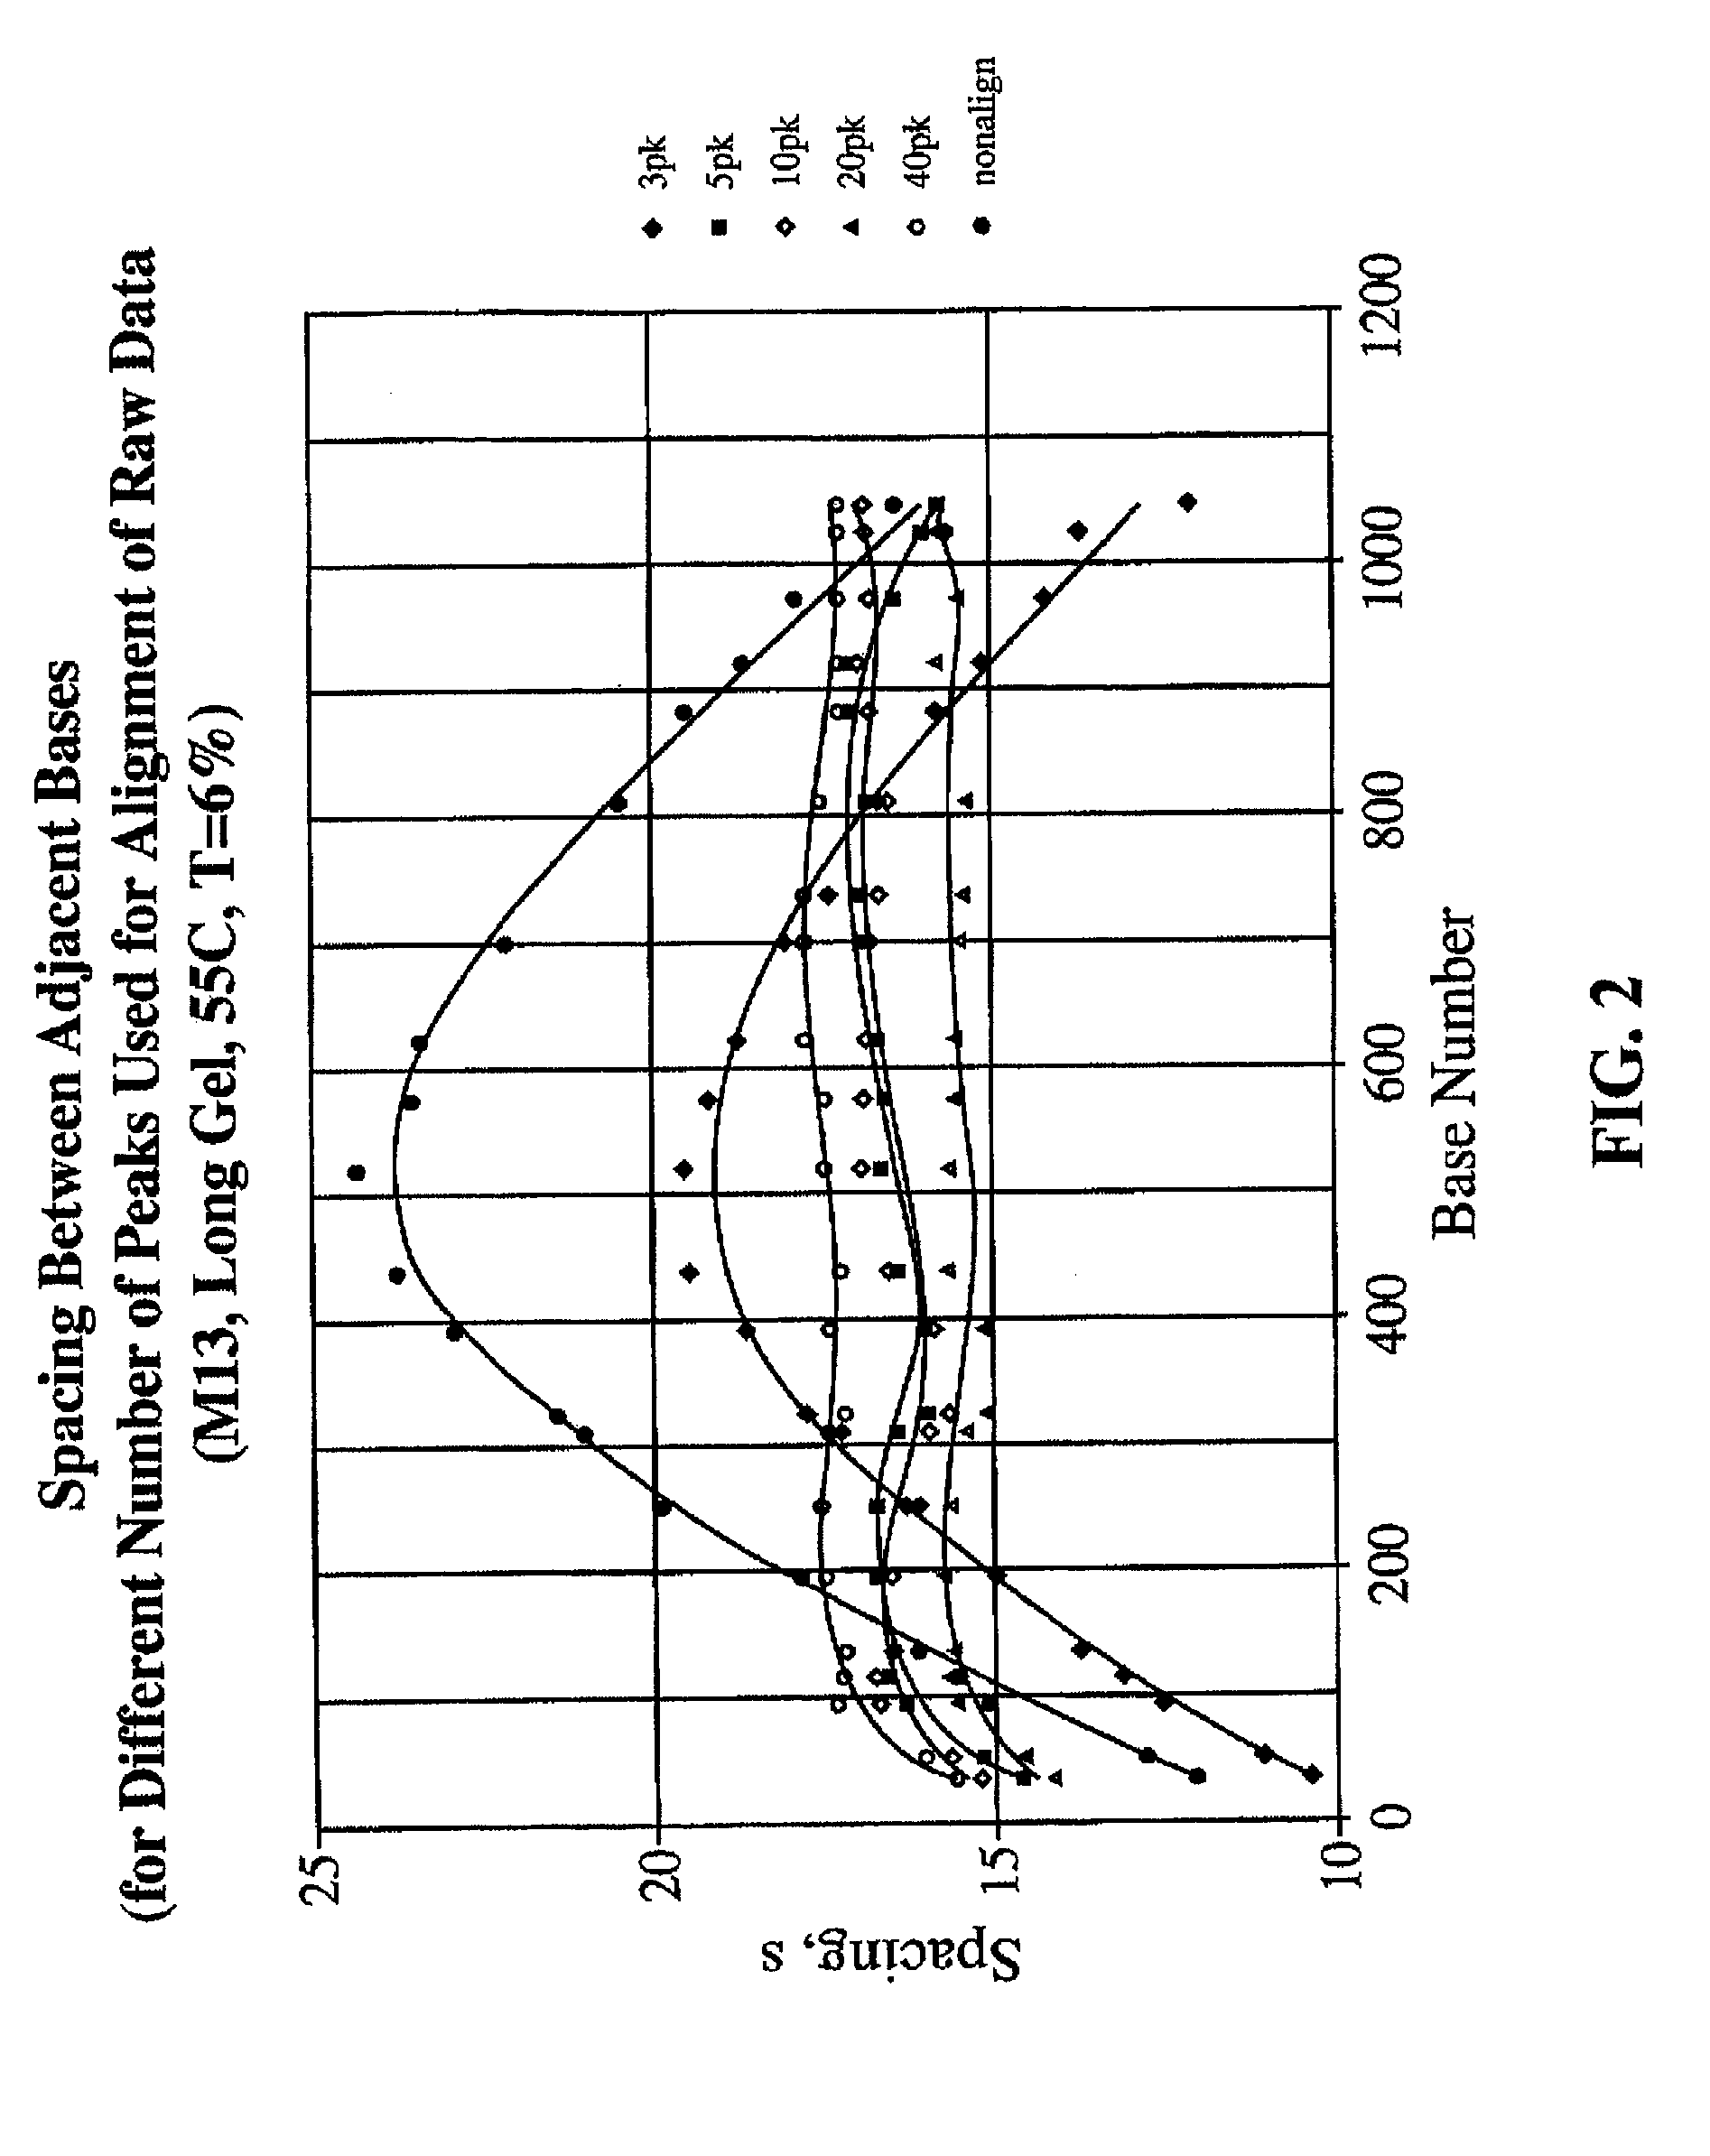 Method and apparatus for alignment of DNA sequencing data traces